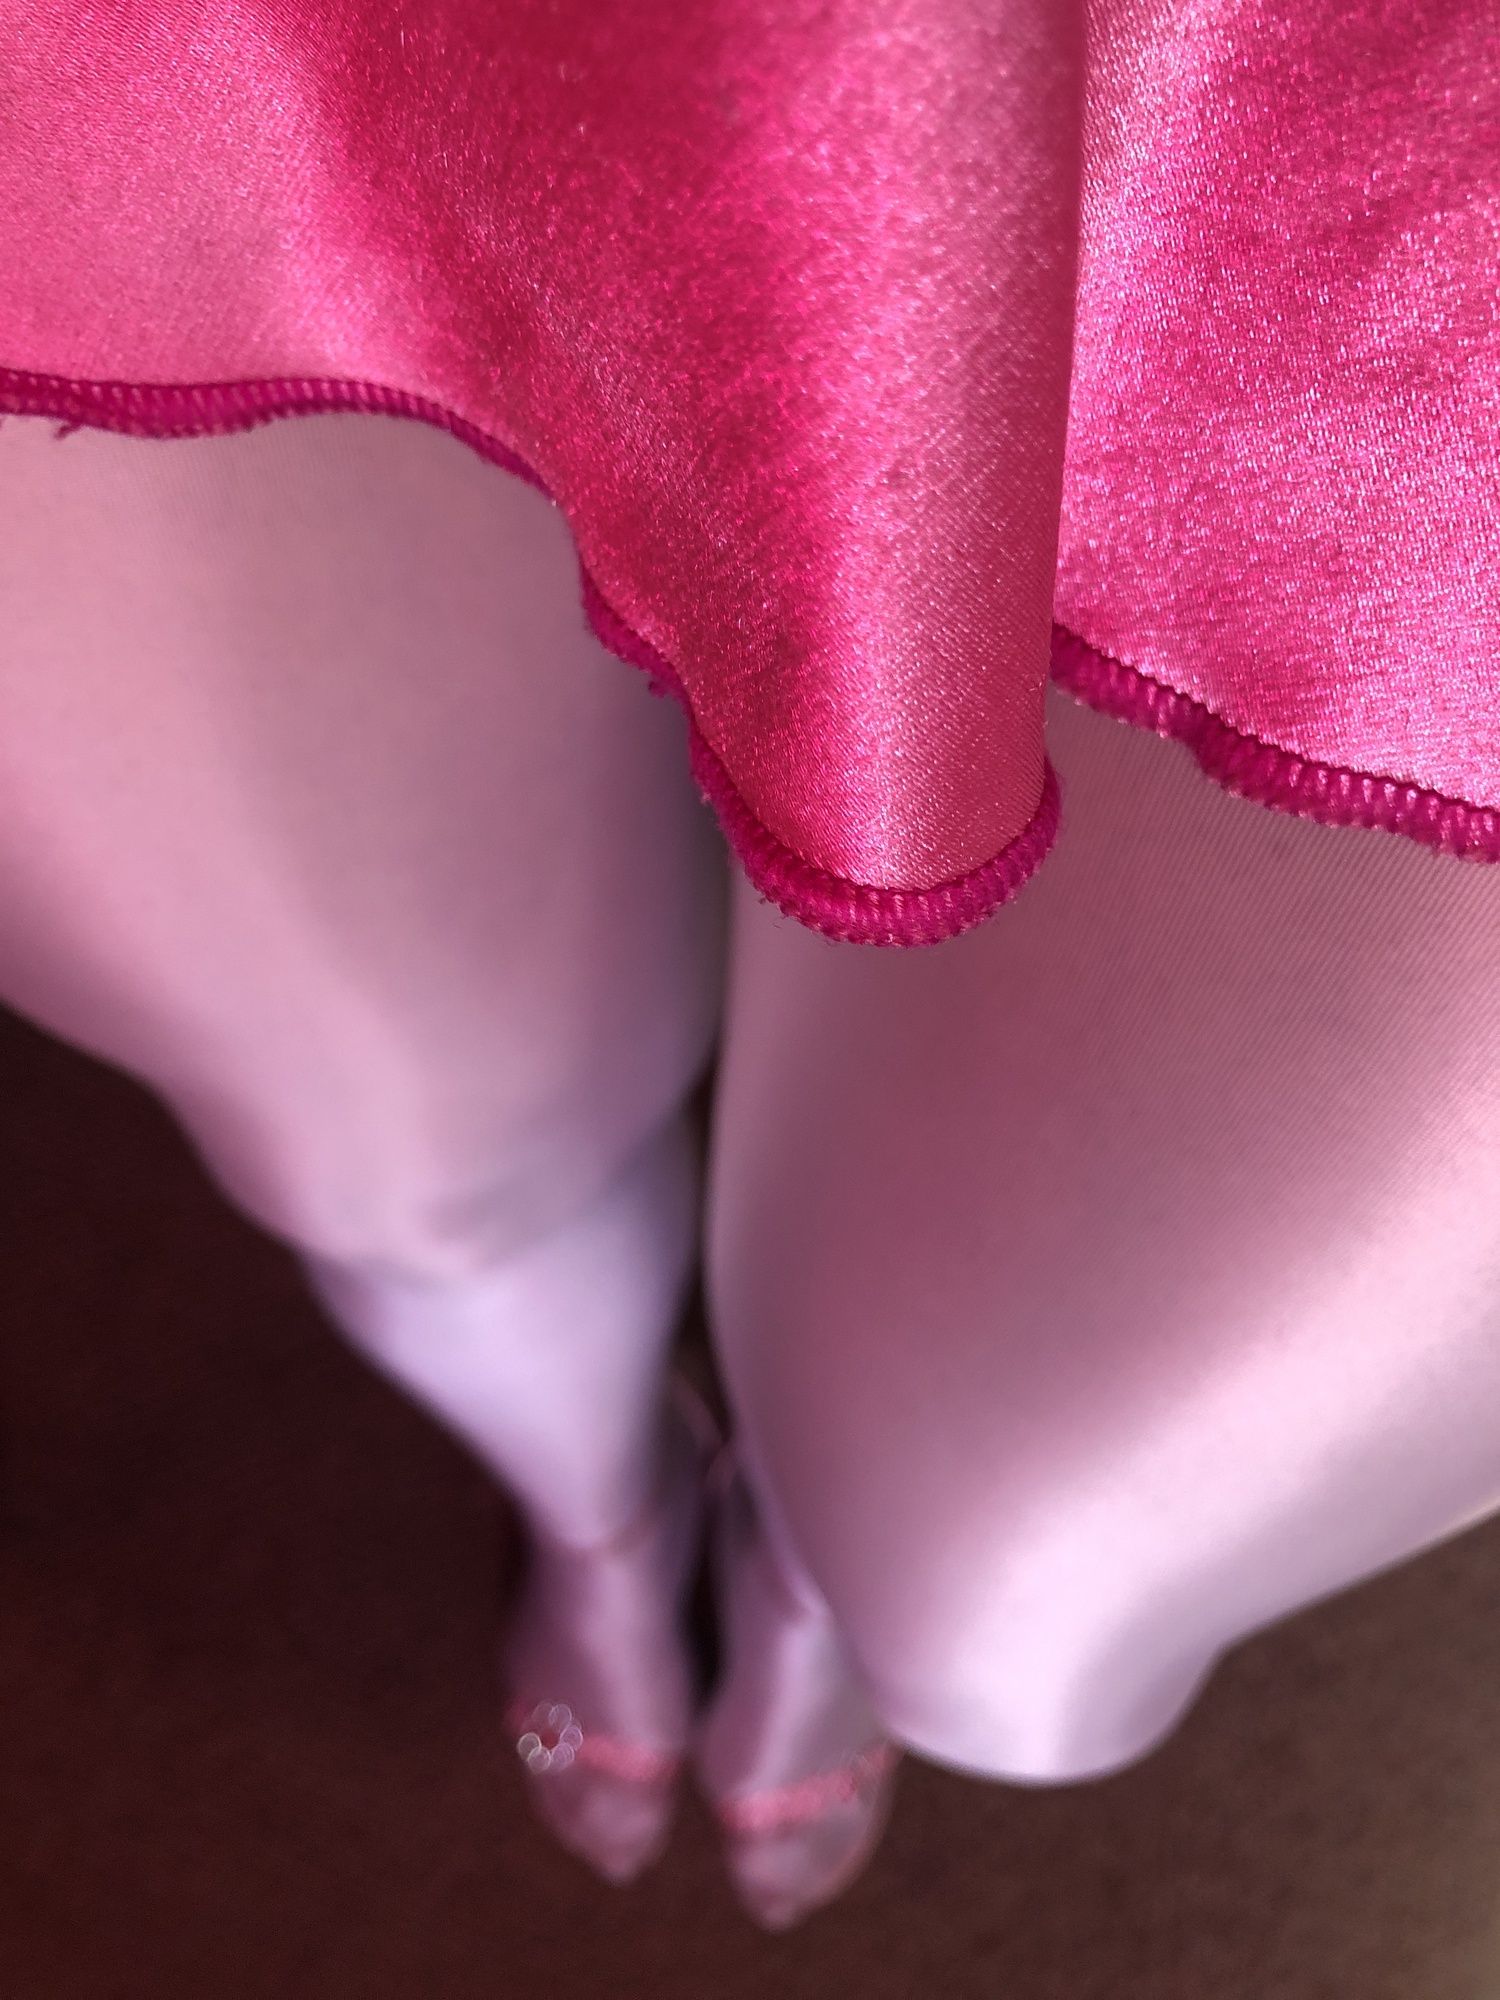 My long legs in white satin tights and sexy pink sandals #6